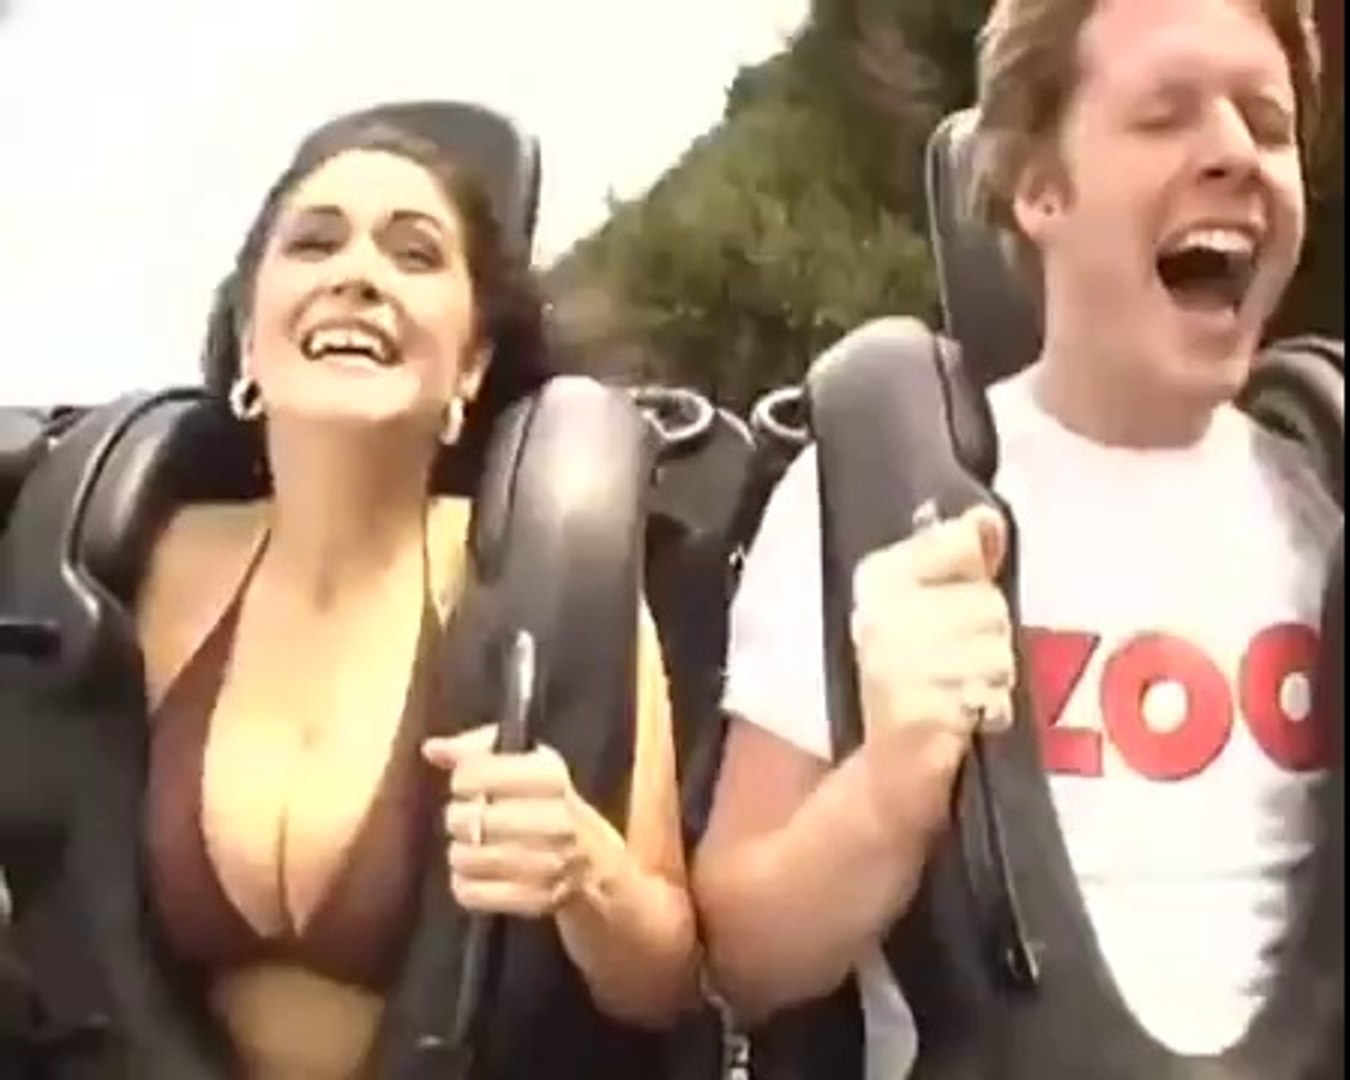 Boobs falling out on rides